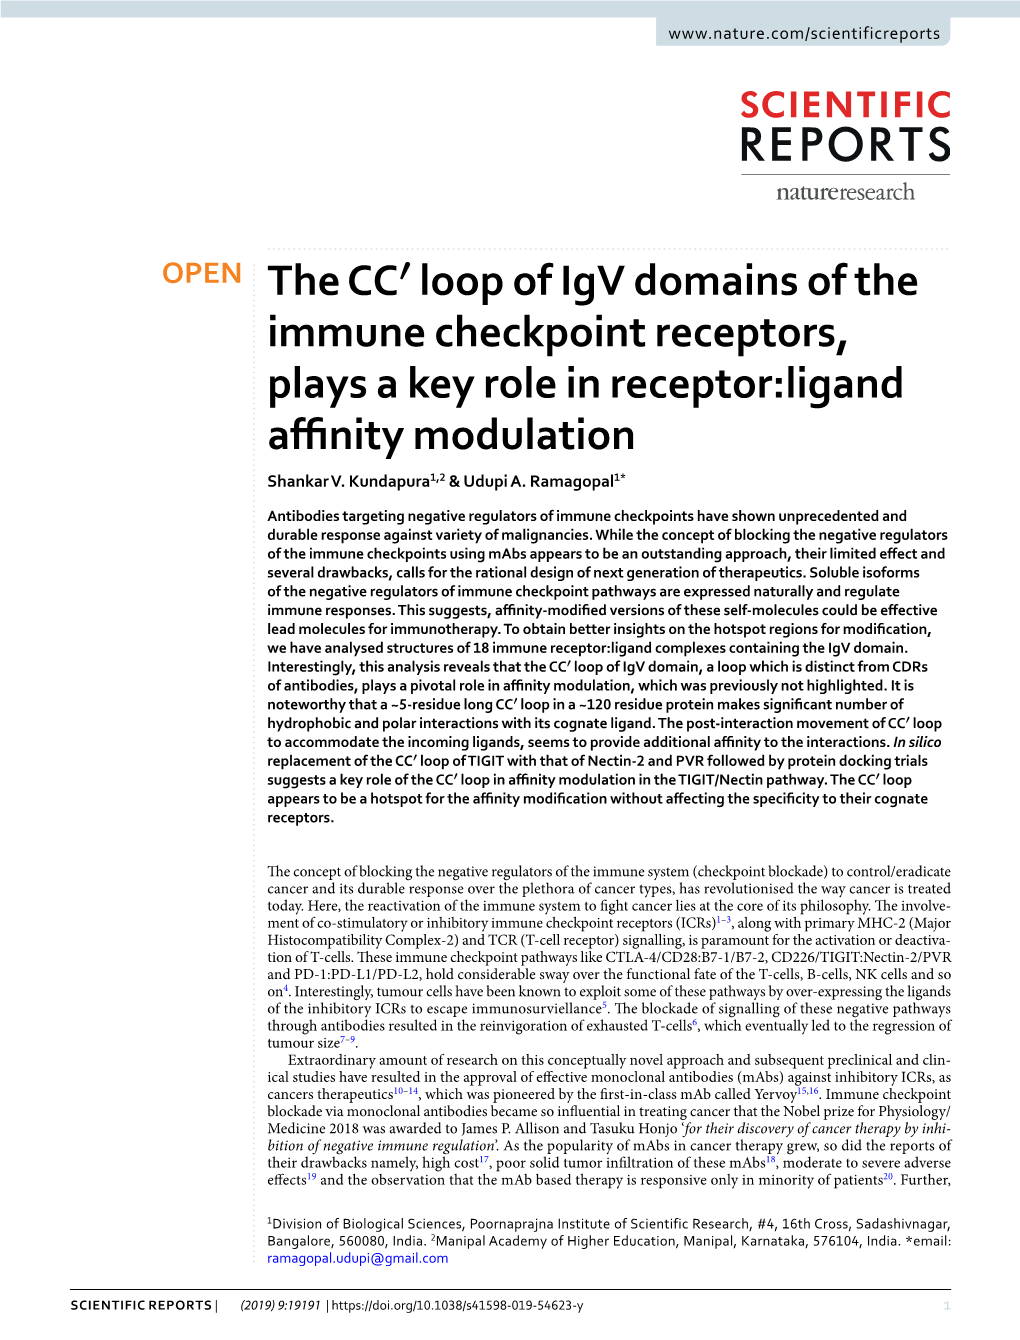 Loop of Igv Domains of the Immune Checkpoint Receptors, Plays a Key Role in Receptor:Ligand Affinity Modulation